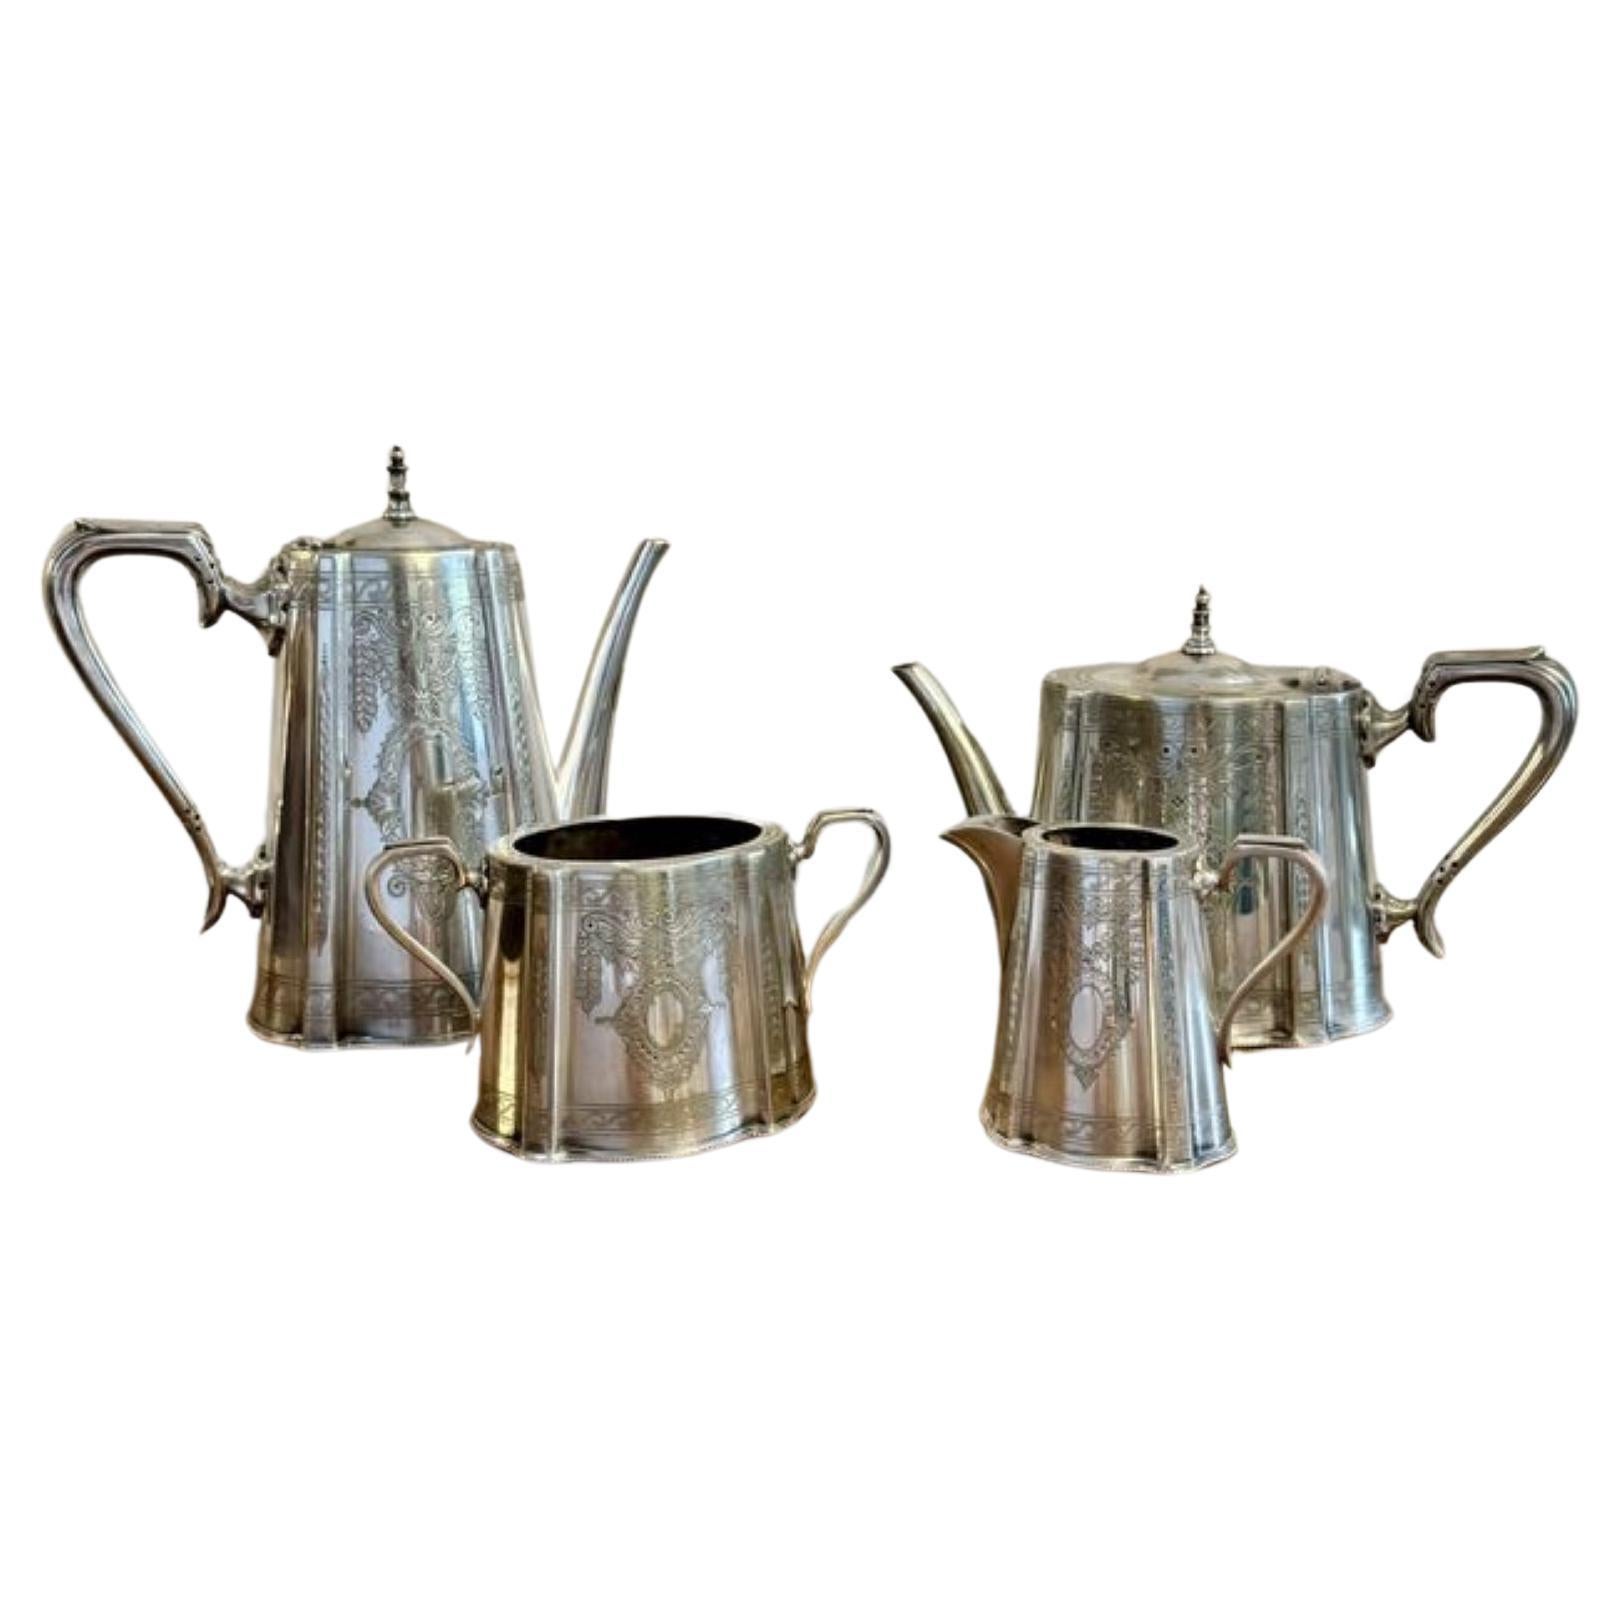 Stunning quality antique Edwardian four piece tea set by Walker and Hall 